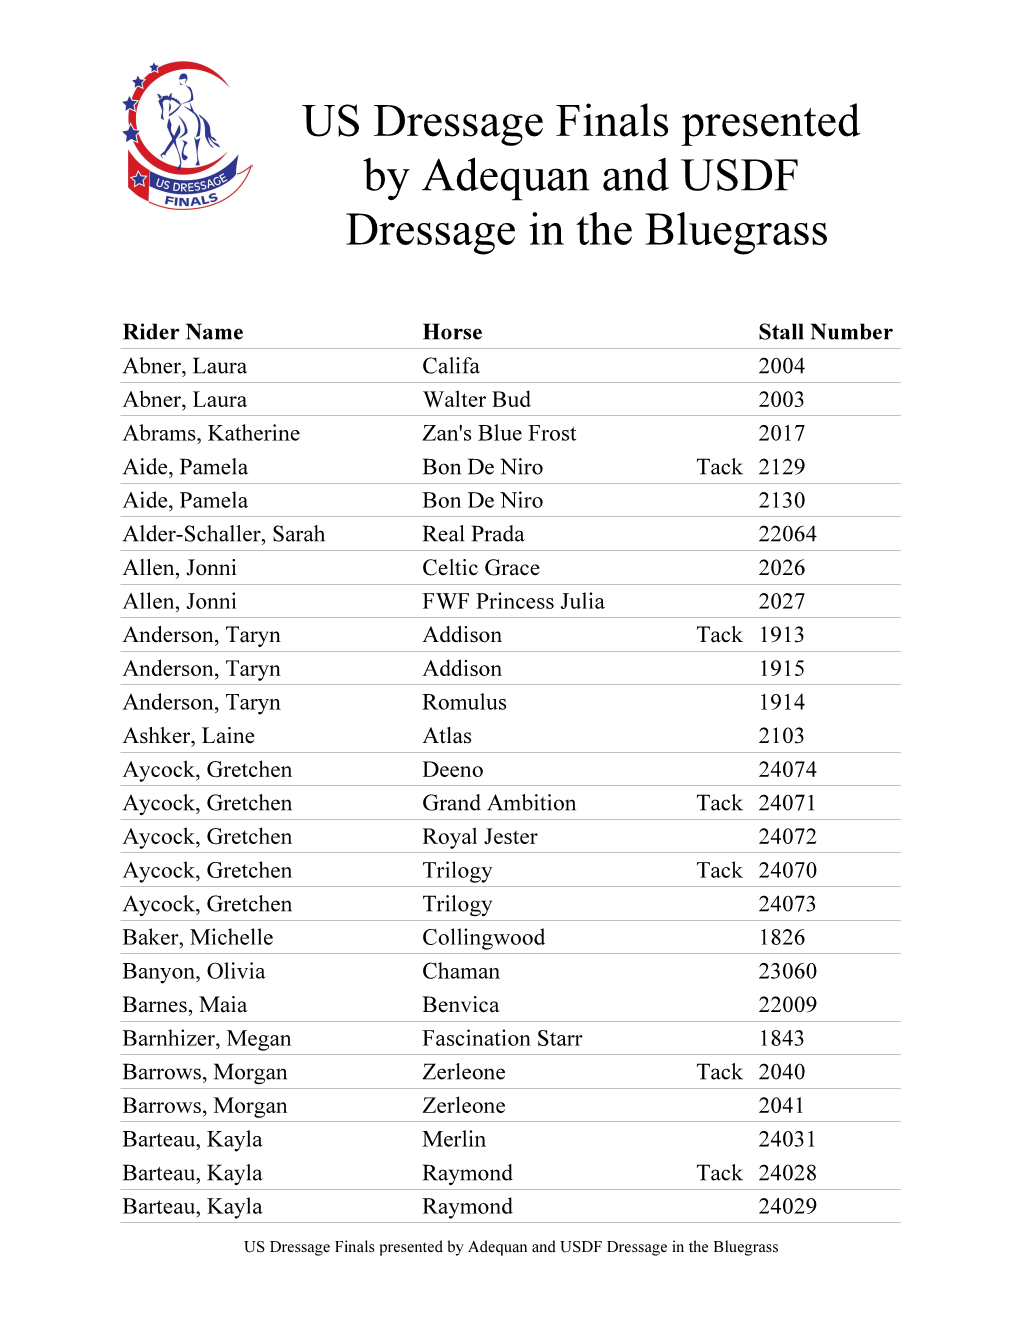 US Dressage Finals Presented by Adequanstall Chart and USDF Dressage in the Bluegrass